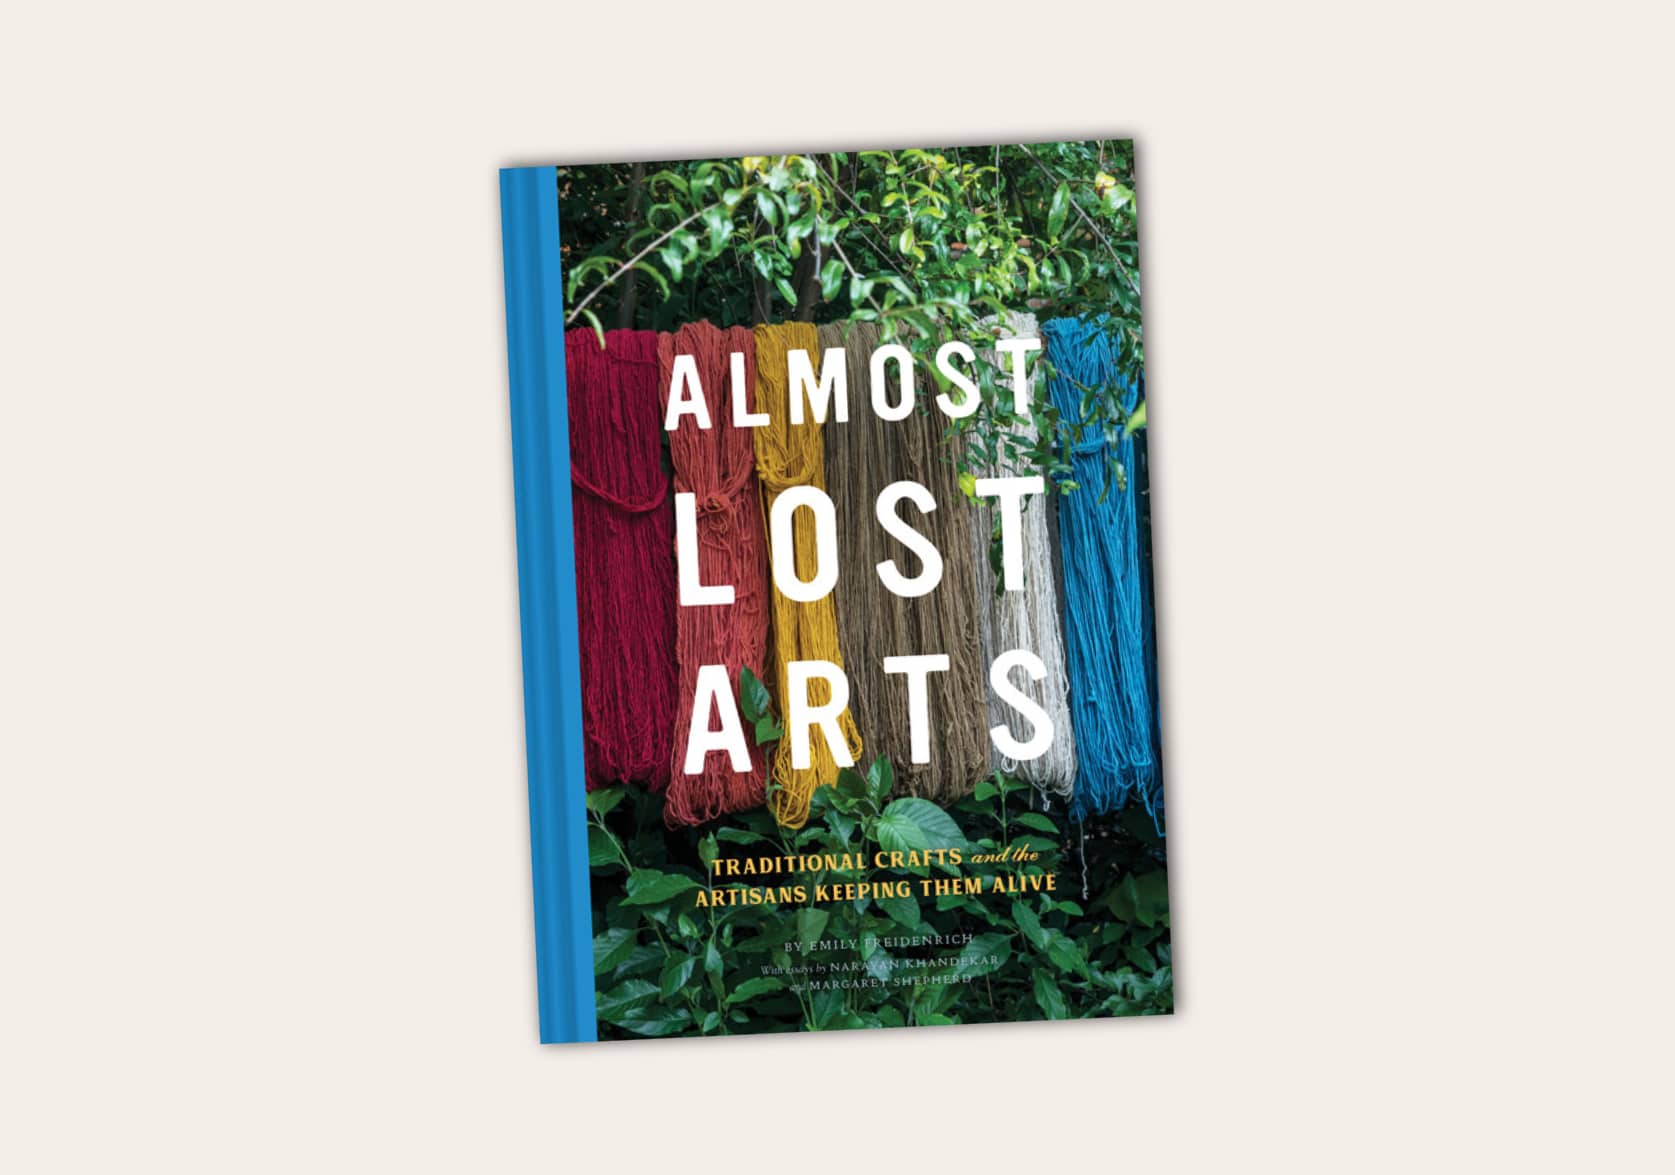 Almost Lost Arts: Traditional Crafts and the Artisans Keeping Them Alive by Emily Freidenrich